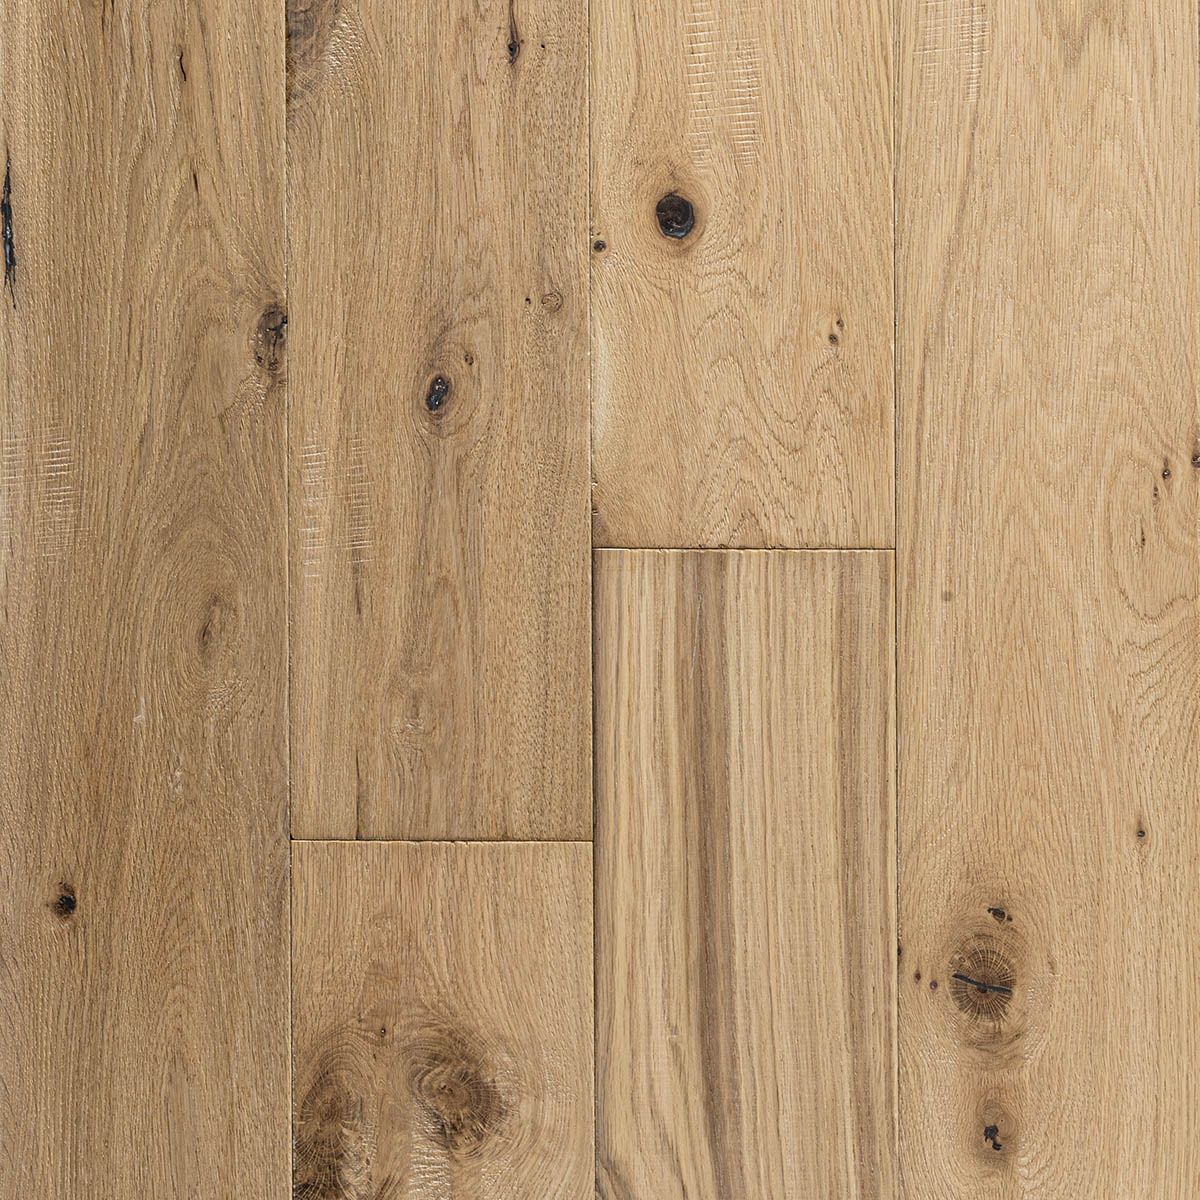 Rustic-grade European oak floor with a hand worked surface texture